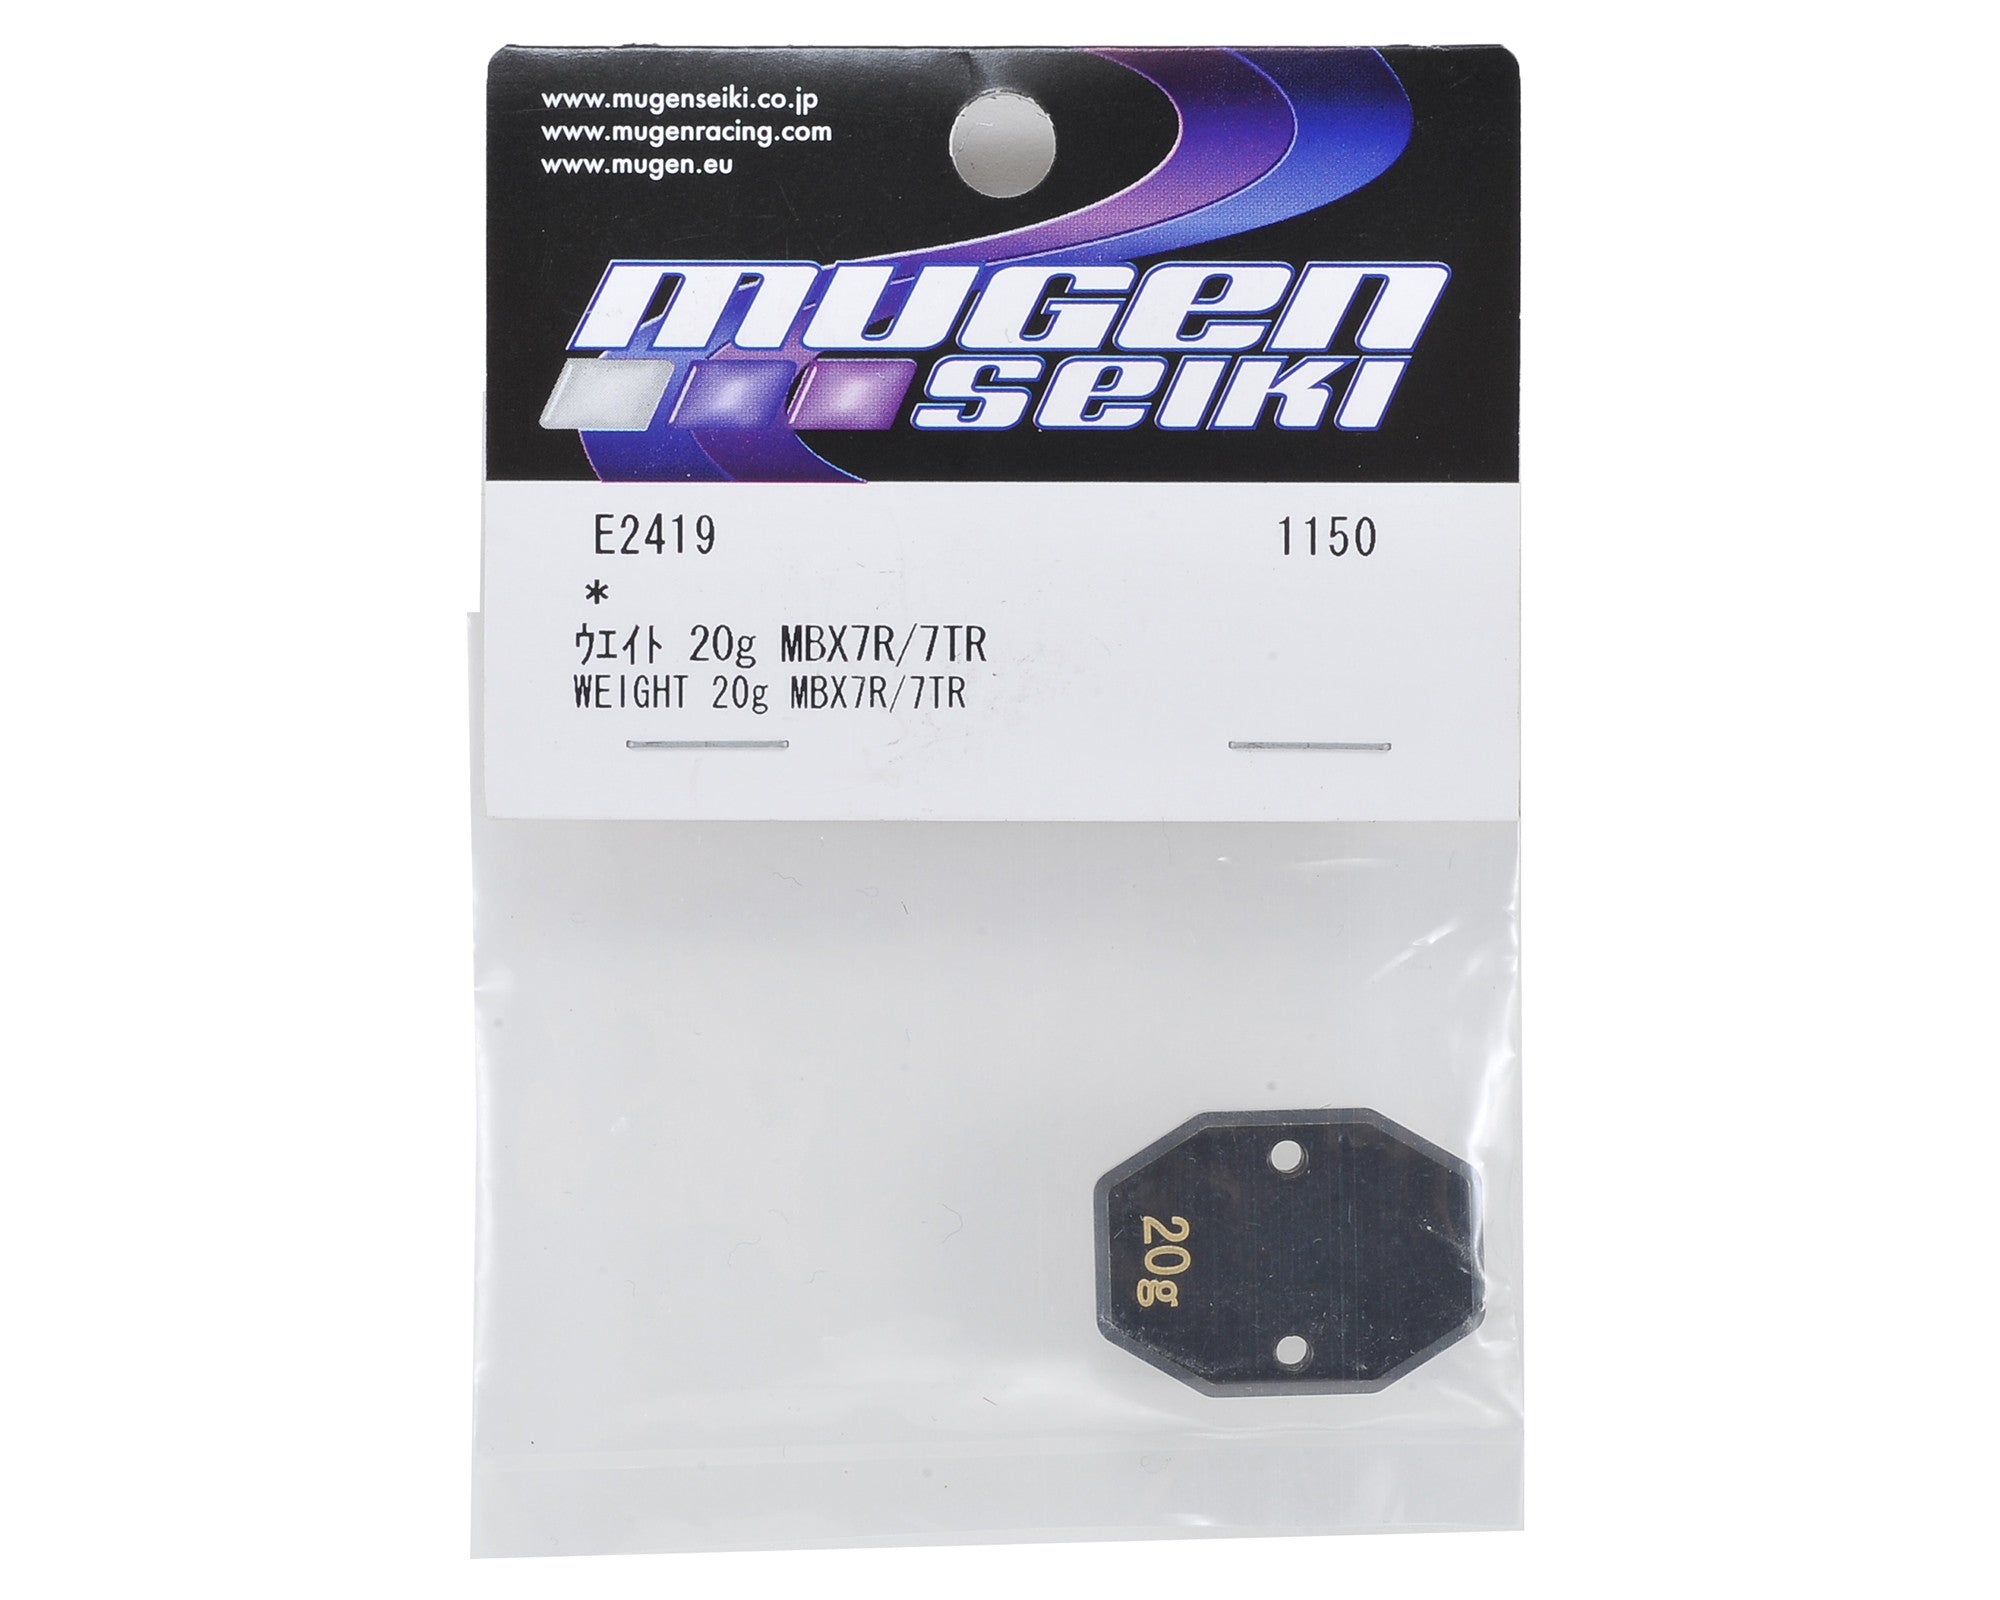 Mugen Seiki MBX7R/X7TR Chassis Weight (20G) - RACERC